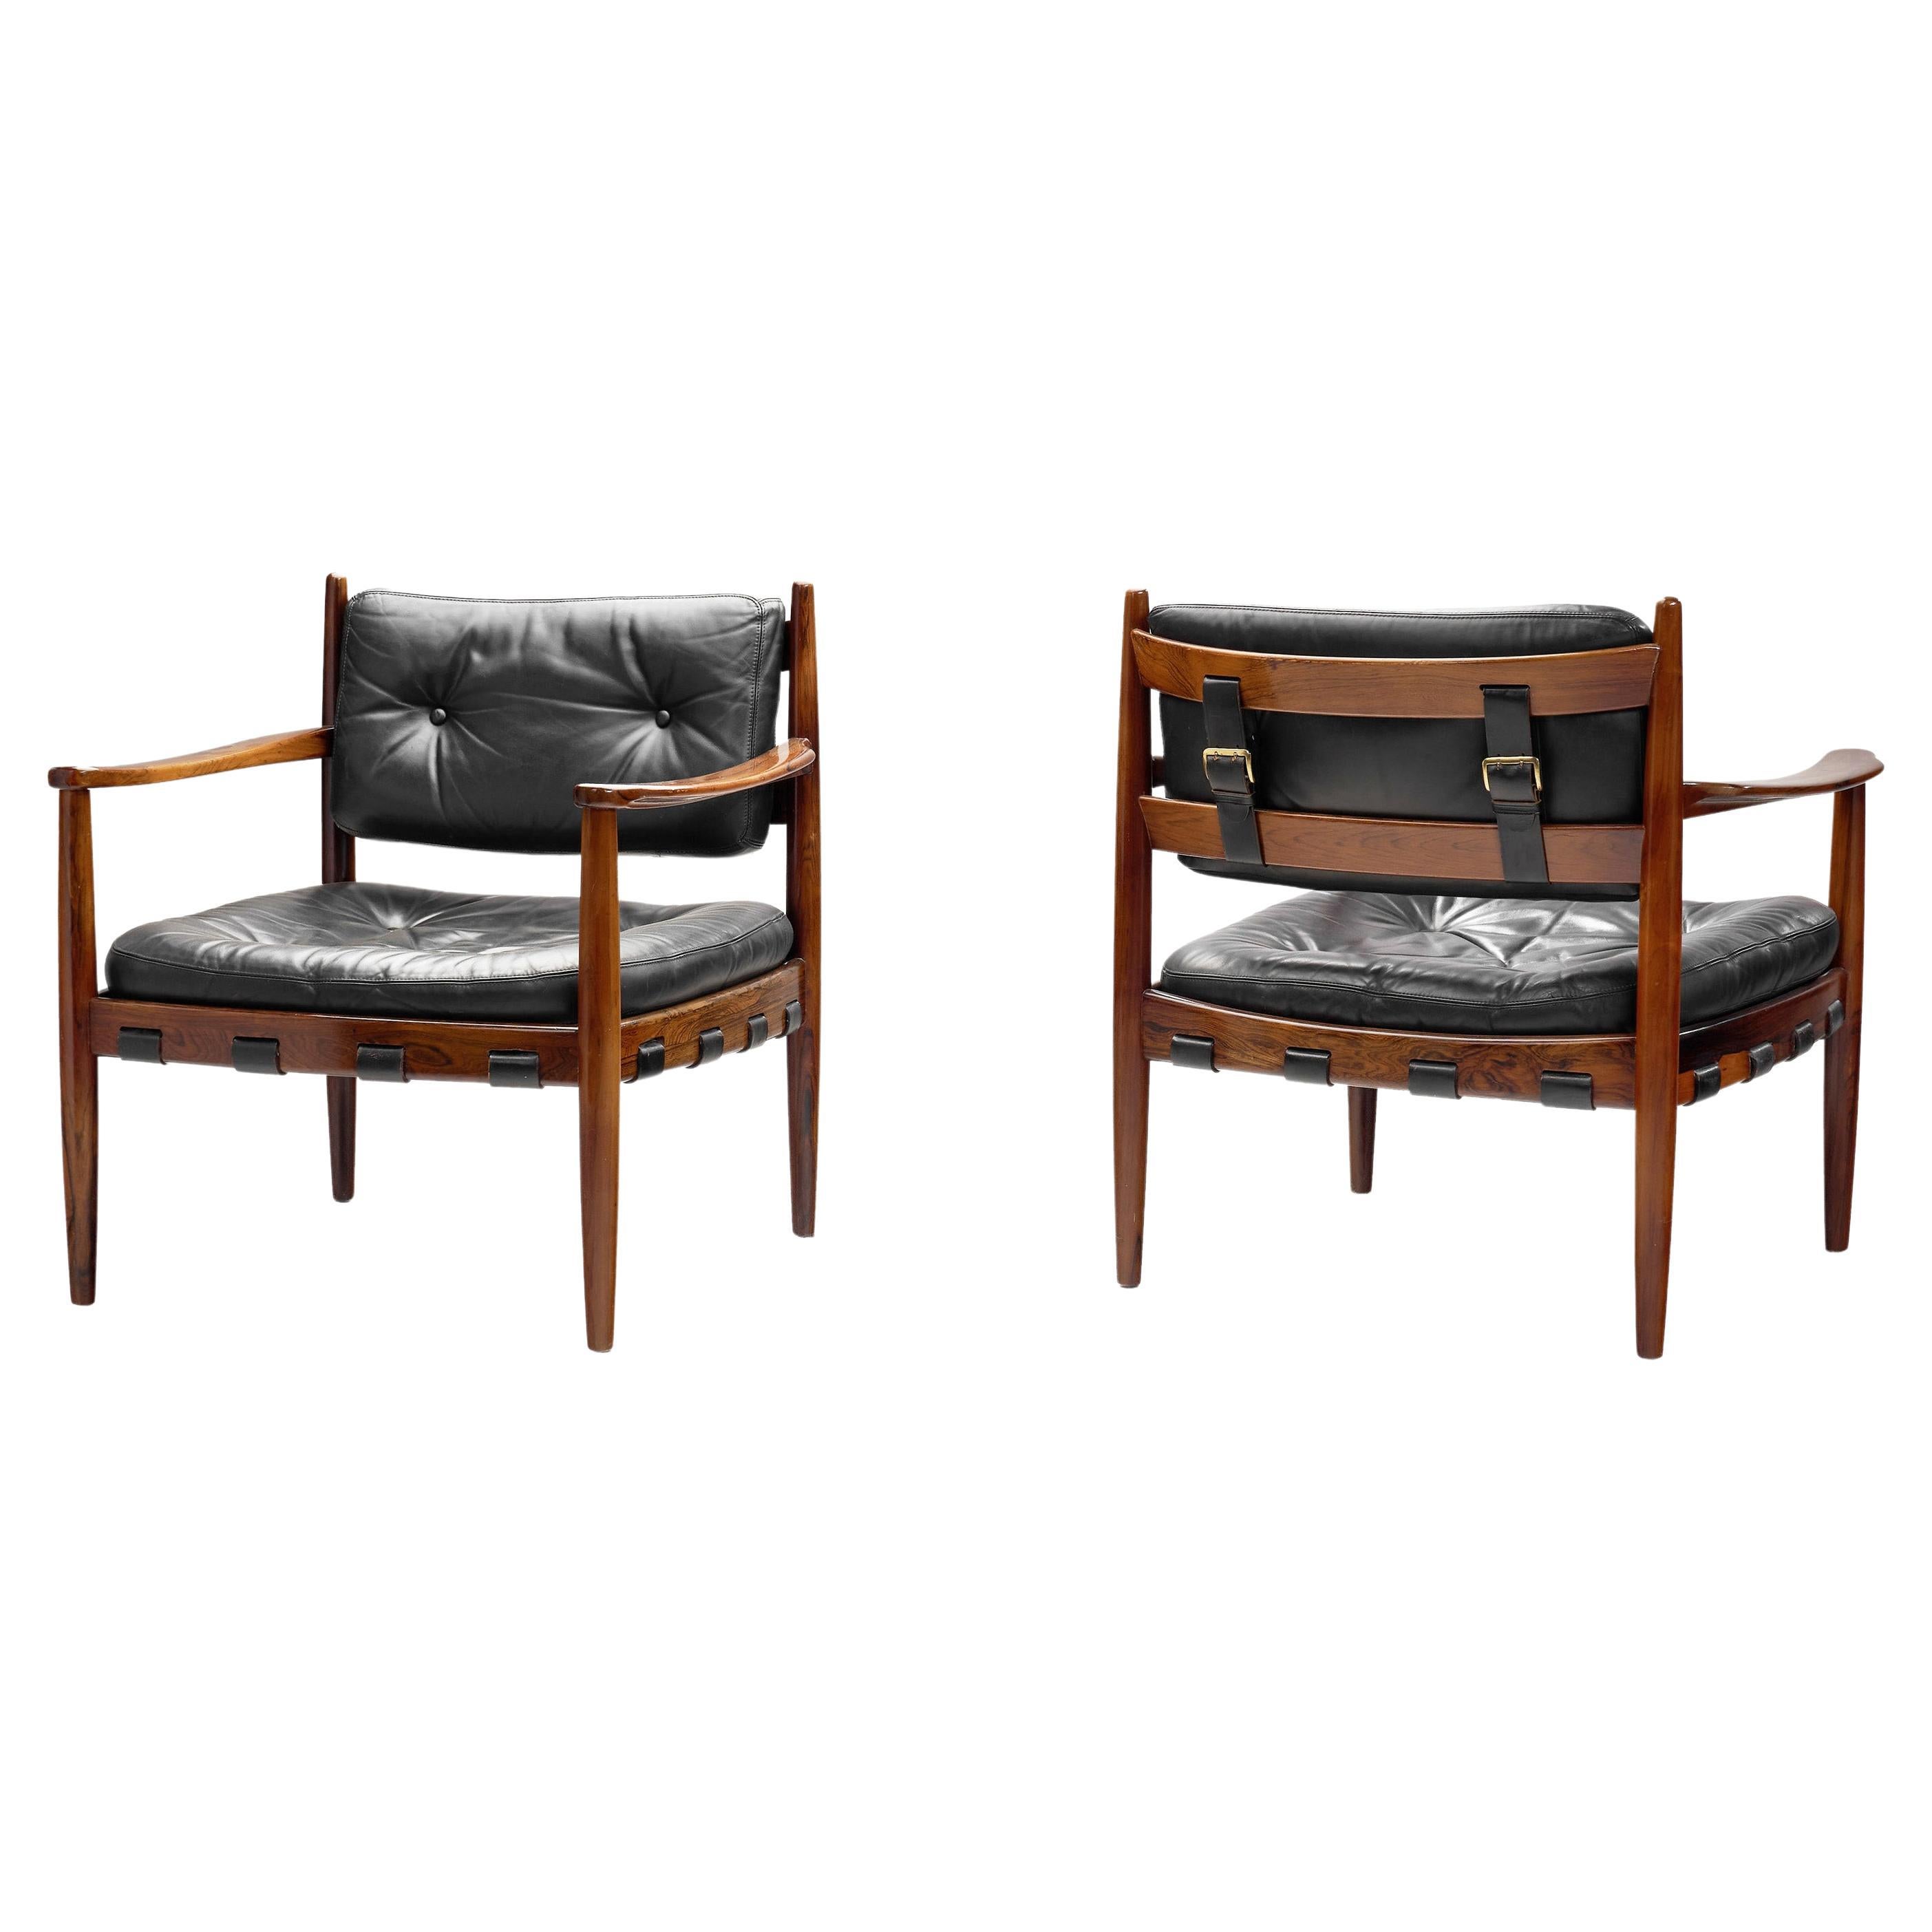 Set of Leather and Wood 'Cadett' Easy Chairs by Eric Merthen, Sweden 1960s